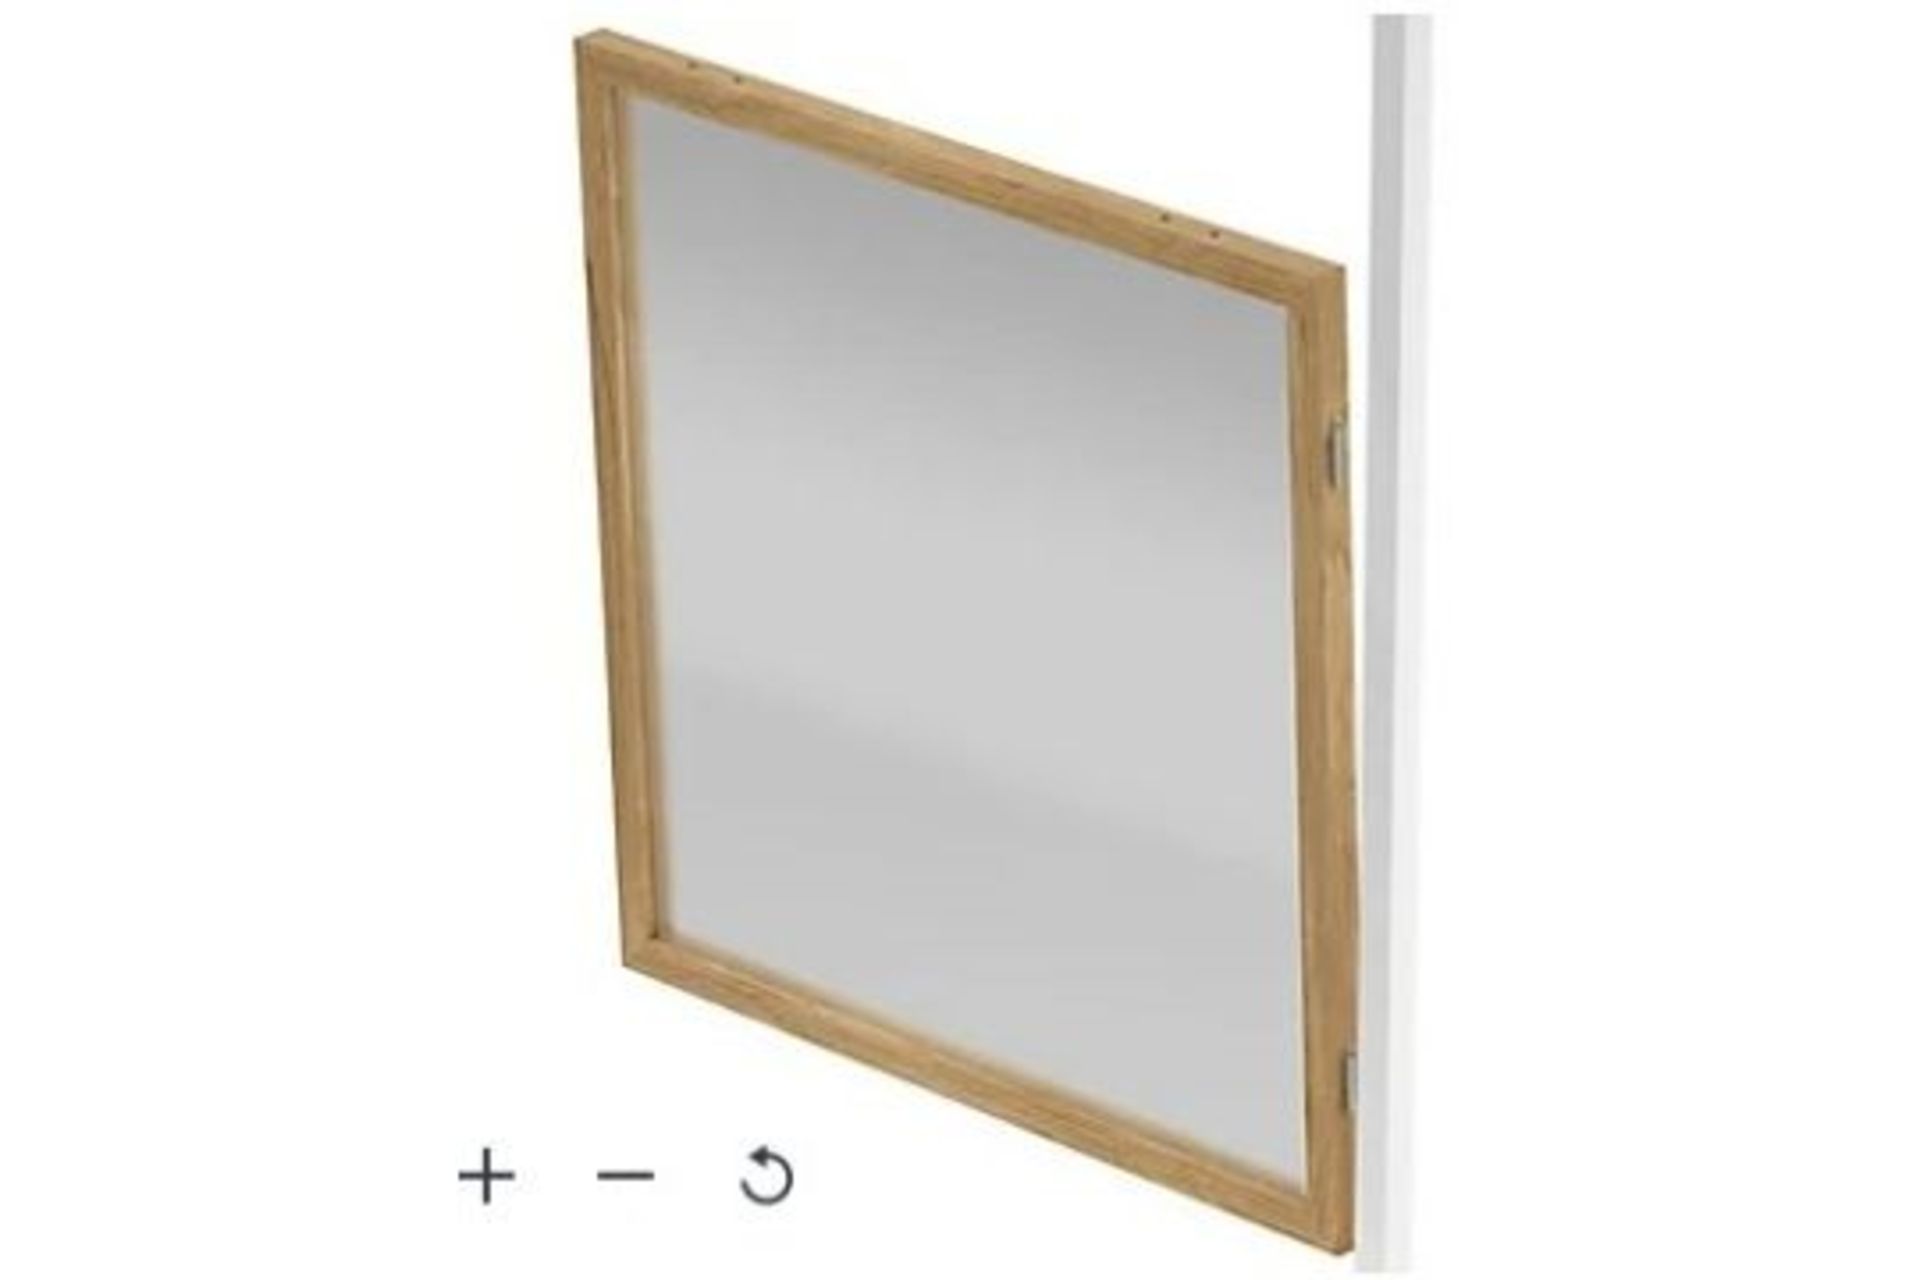 PALLET TO CONTAIN 22 x NEW & BOXED GoodHome Alara Natural Frosted Glass Modular Room divider - Image 3 of 5